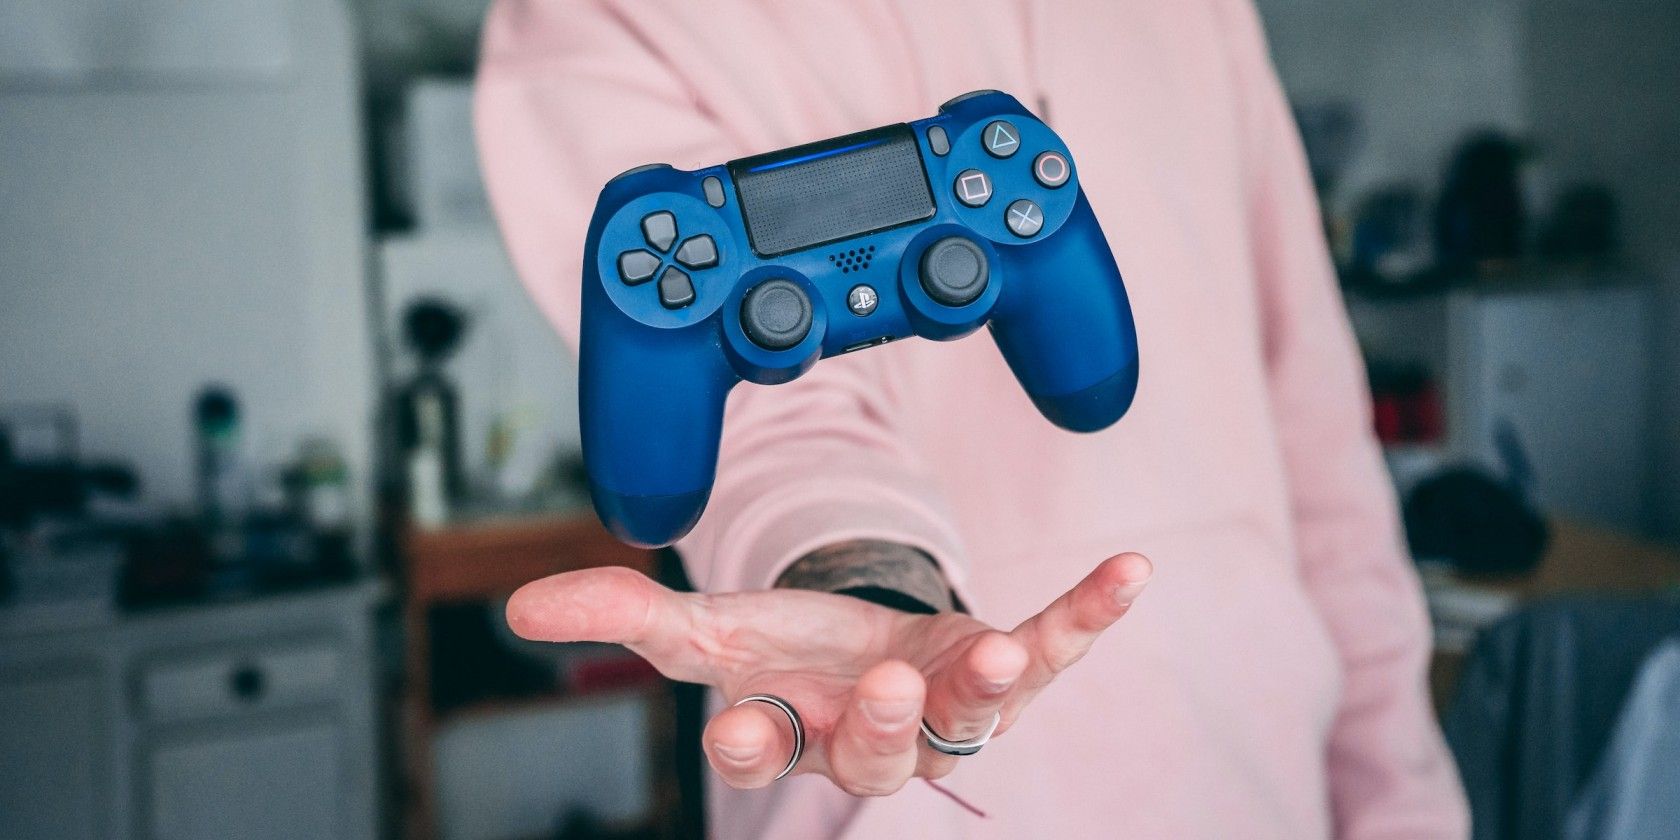 How to Improve Your Life by Treating It Like a Video Game